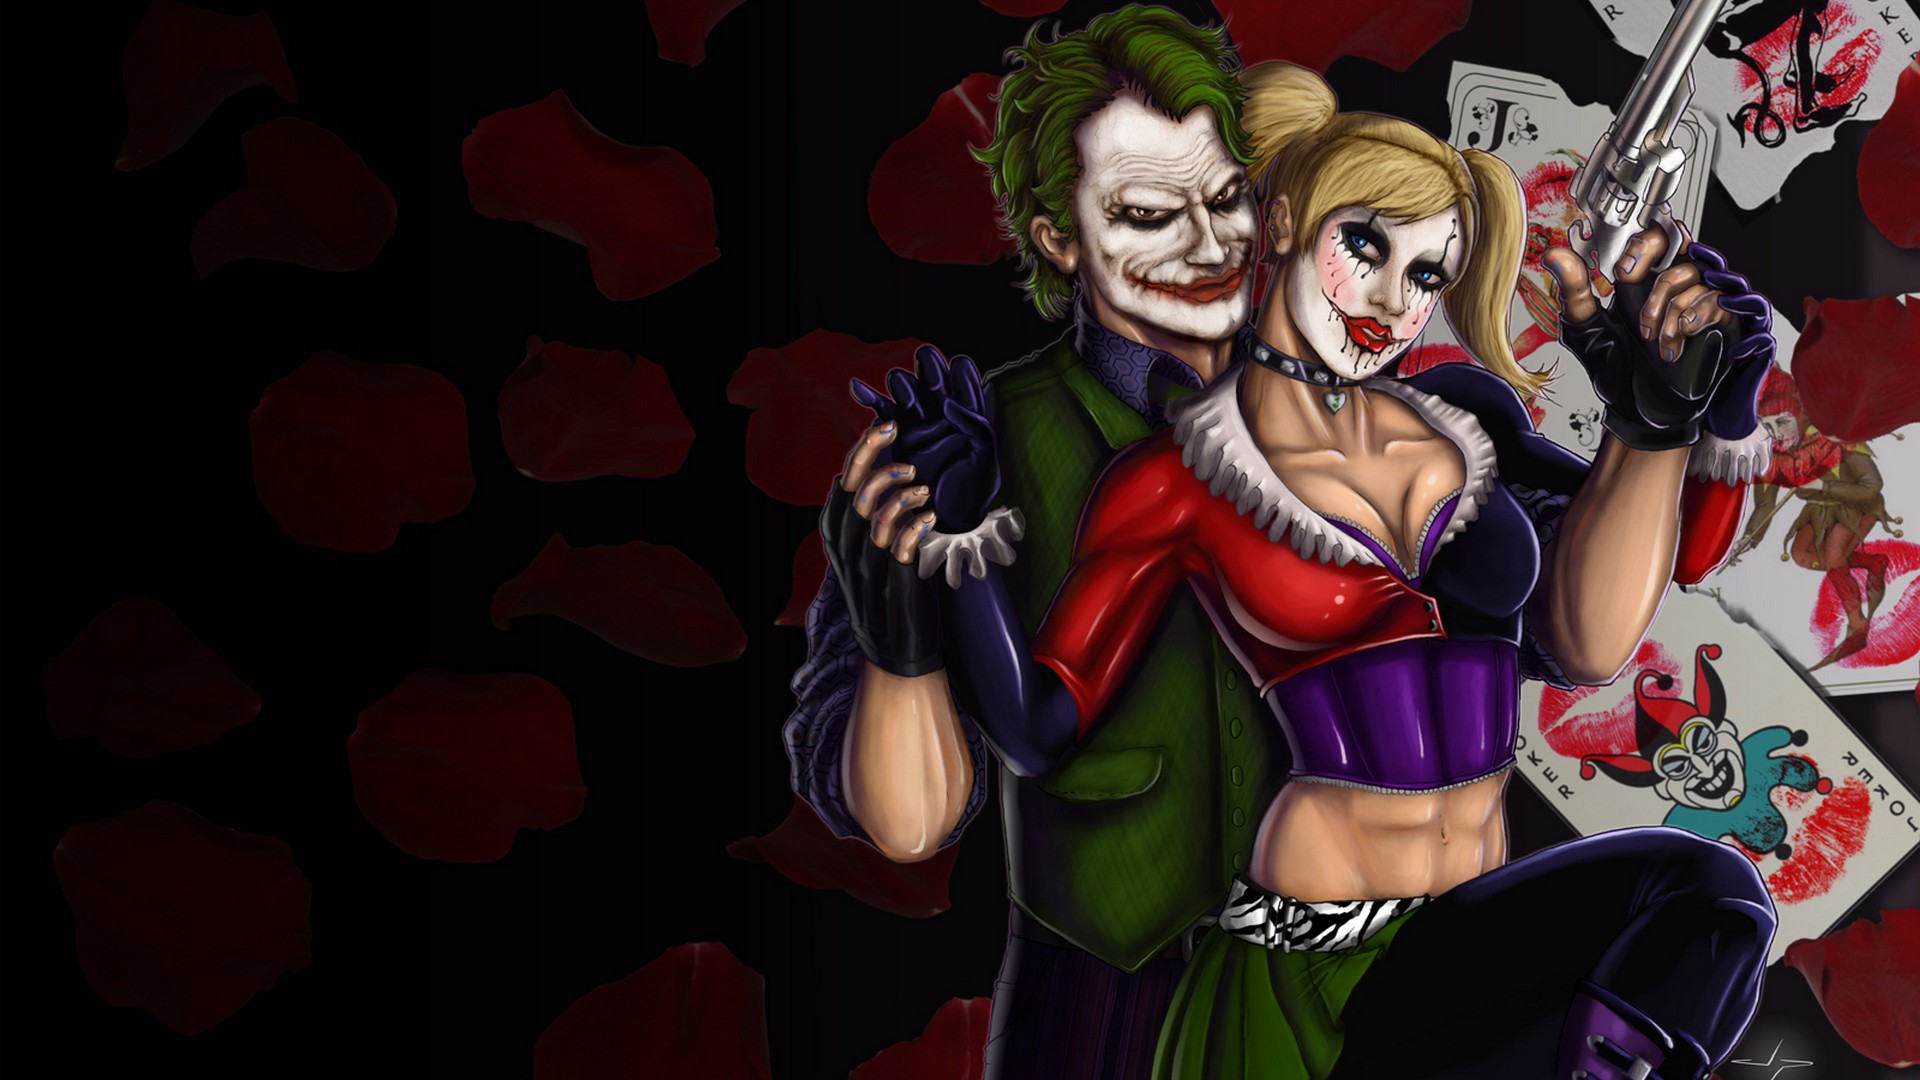 Joker And Harley Wallpaper with image resolution 1920x1080 pixel. You can use this wallpaper as background for your desktop Computer Screensavers, Android or iPhone smartphones